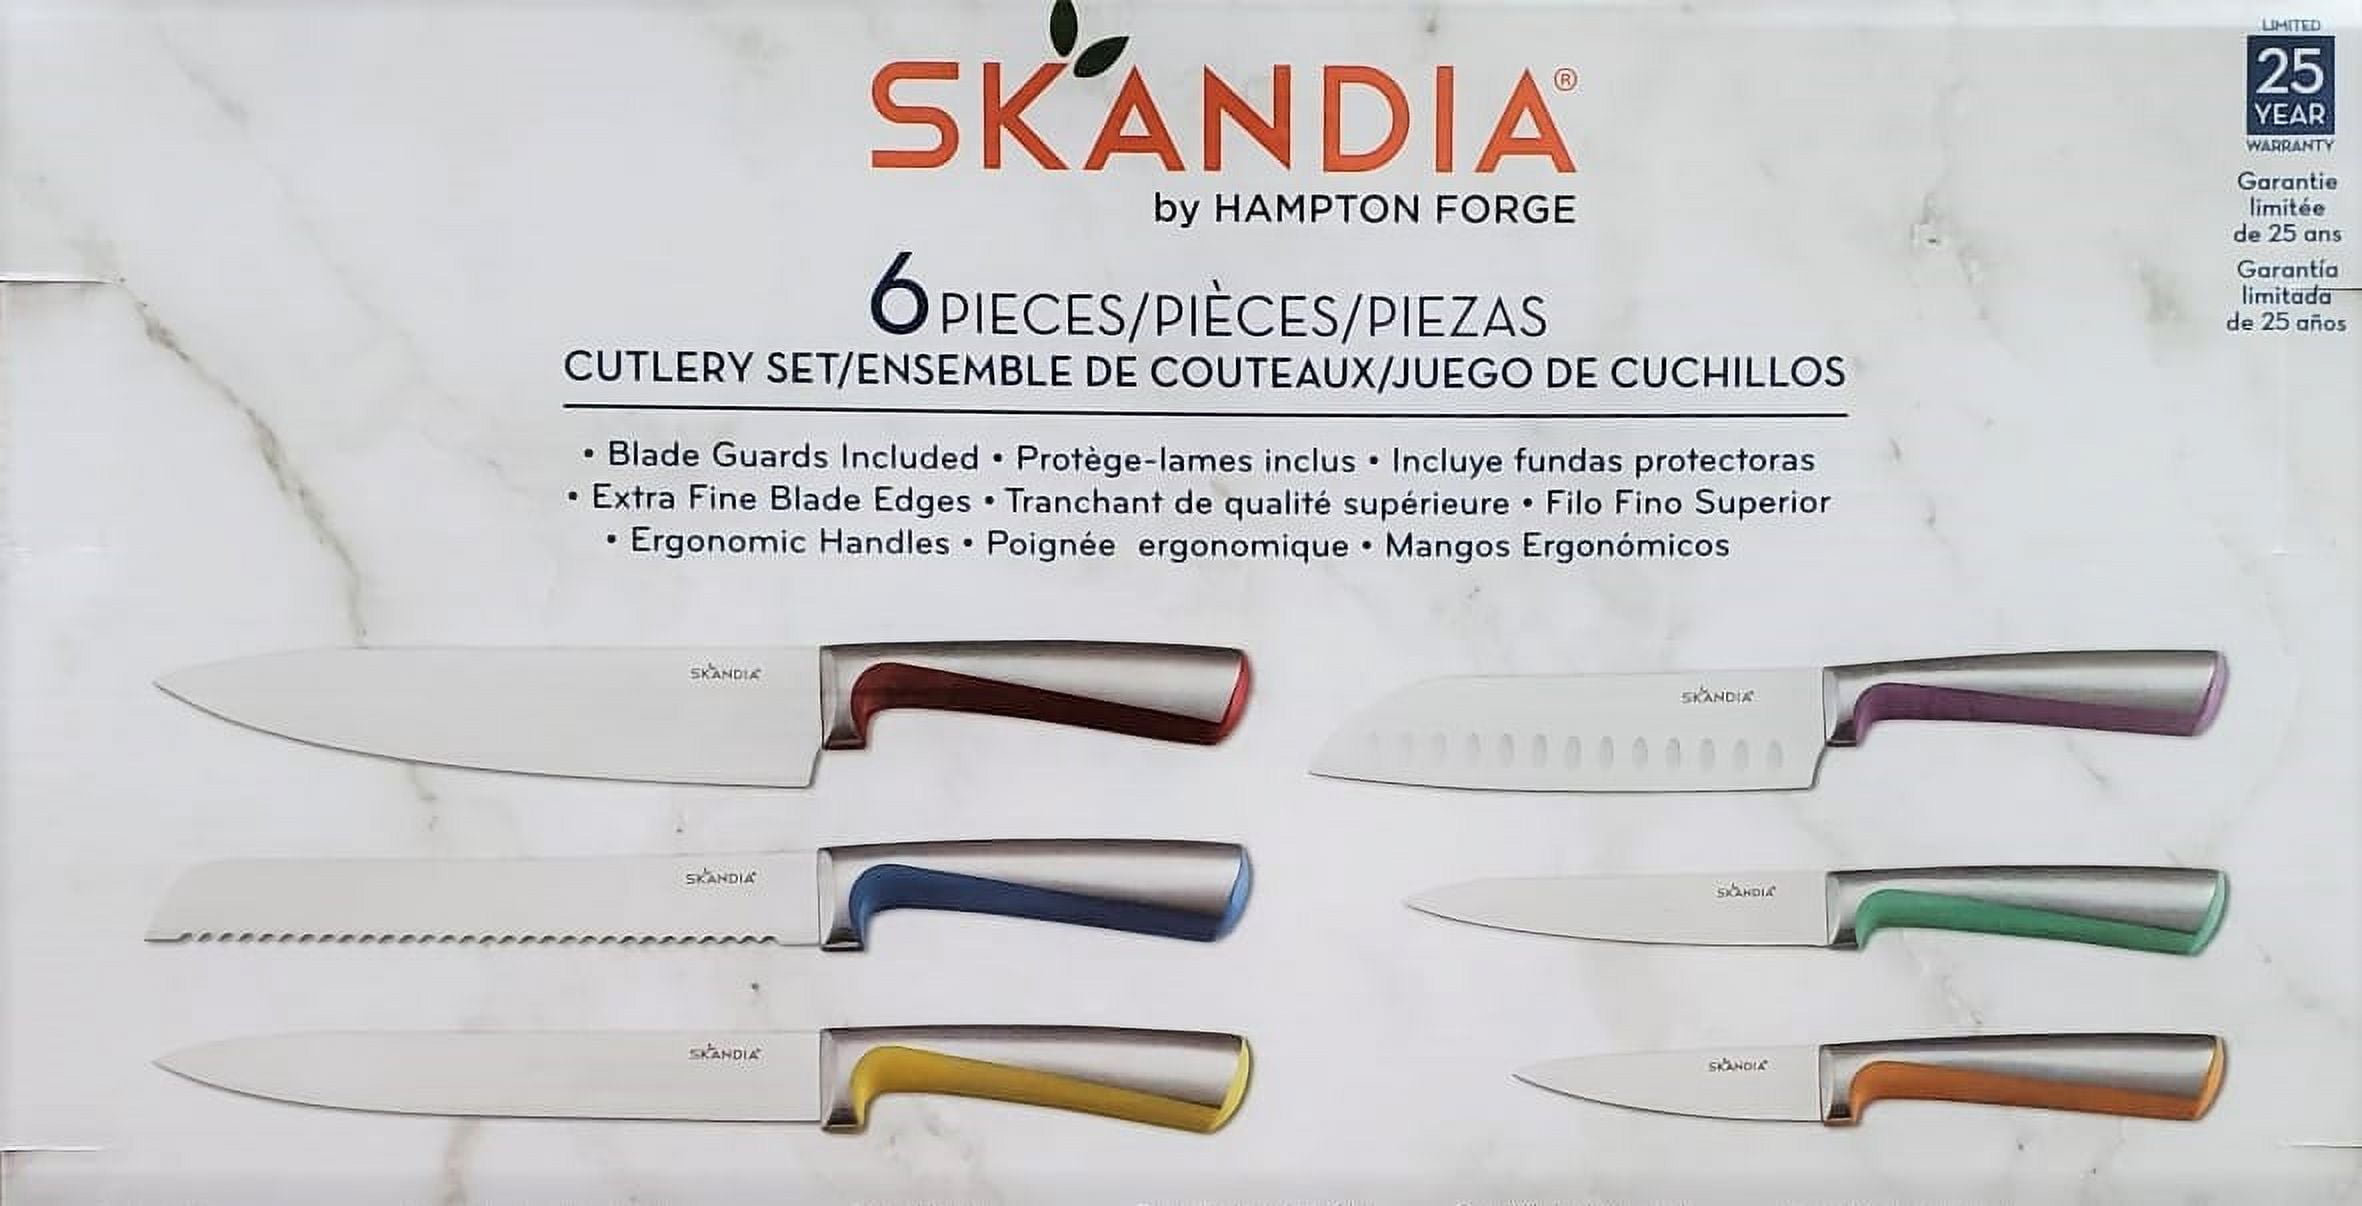 Knife Set with Blade Guards 5-piece Skandia by Hampton Forge, High Carbon